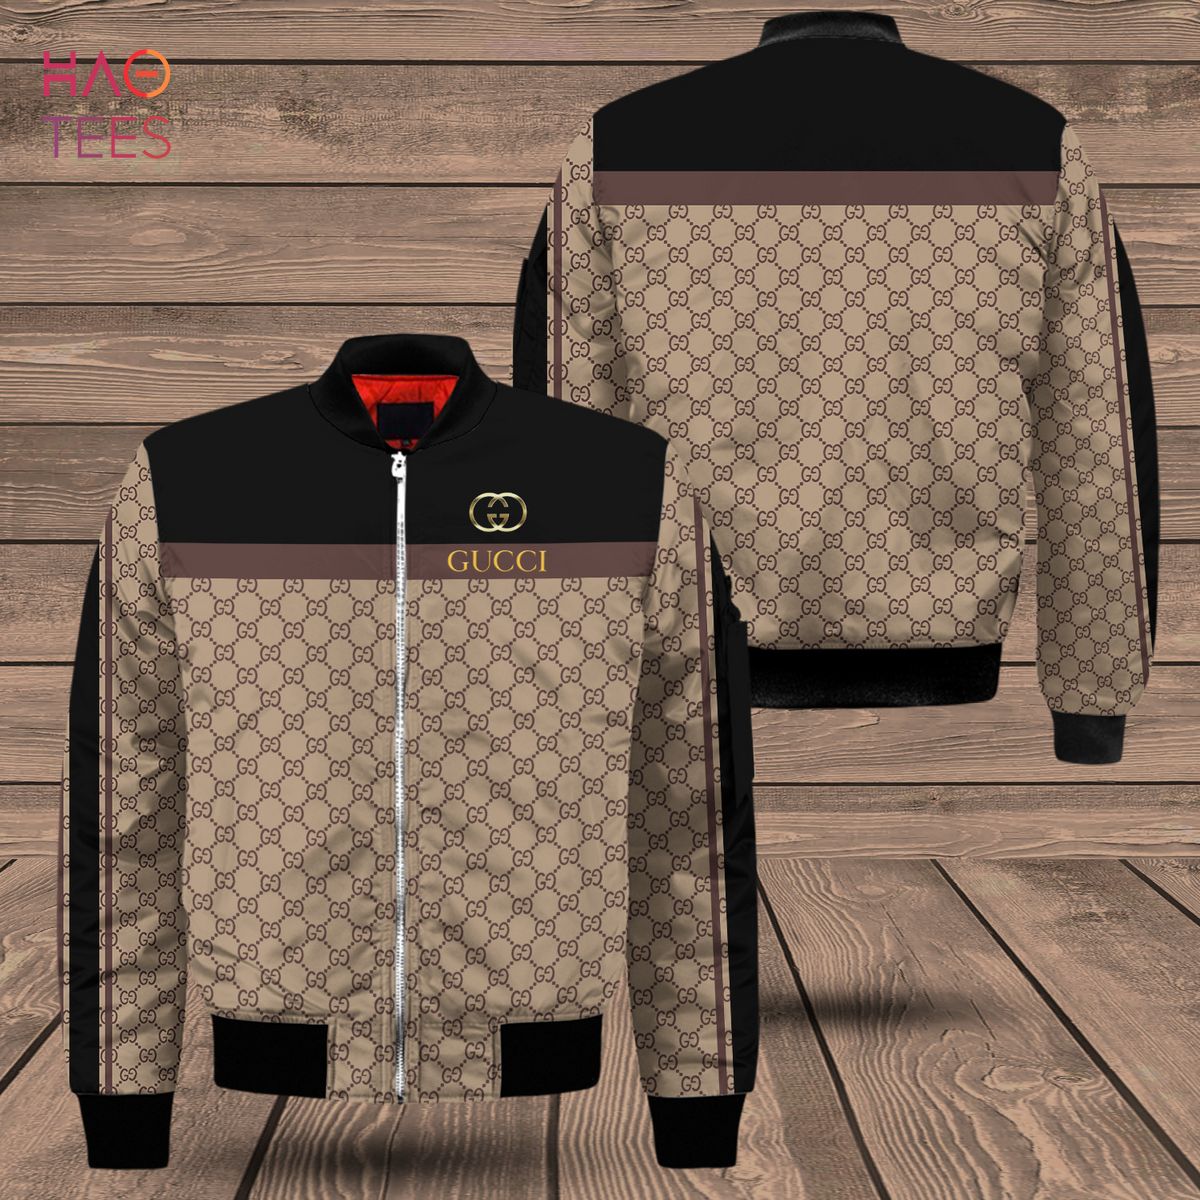 BEST Gucci Luxury Brand Brown Mix Black Bomber Jacket Limited Edition